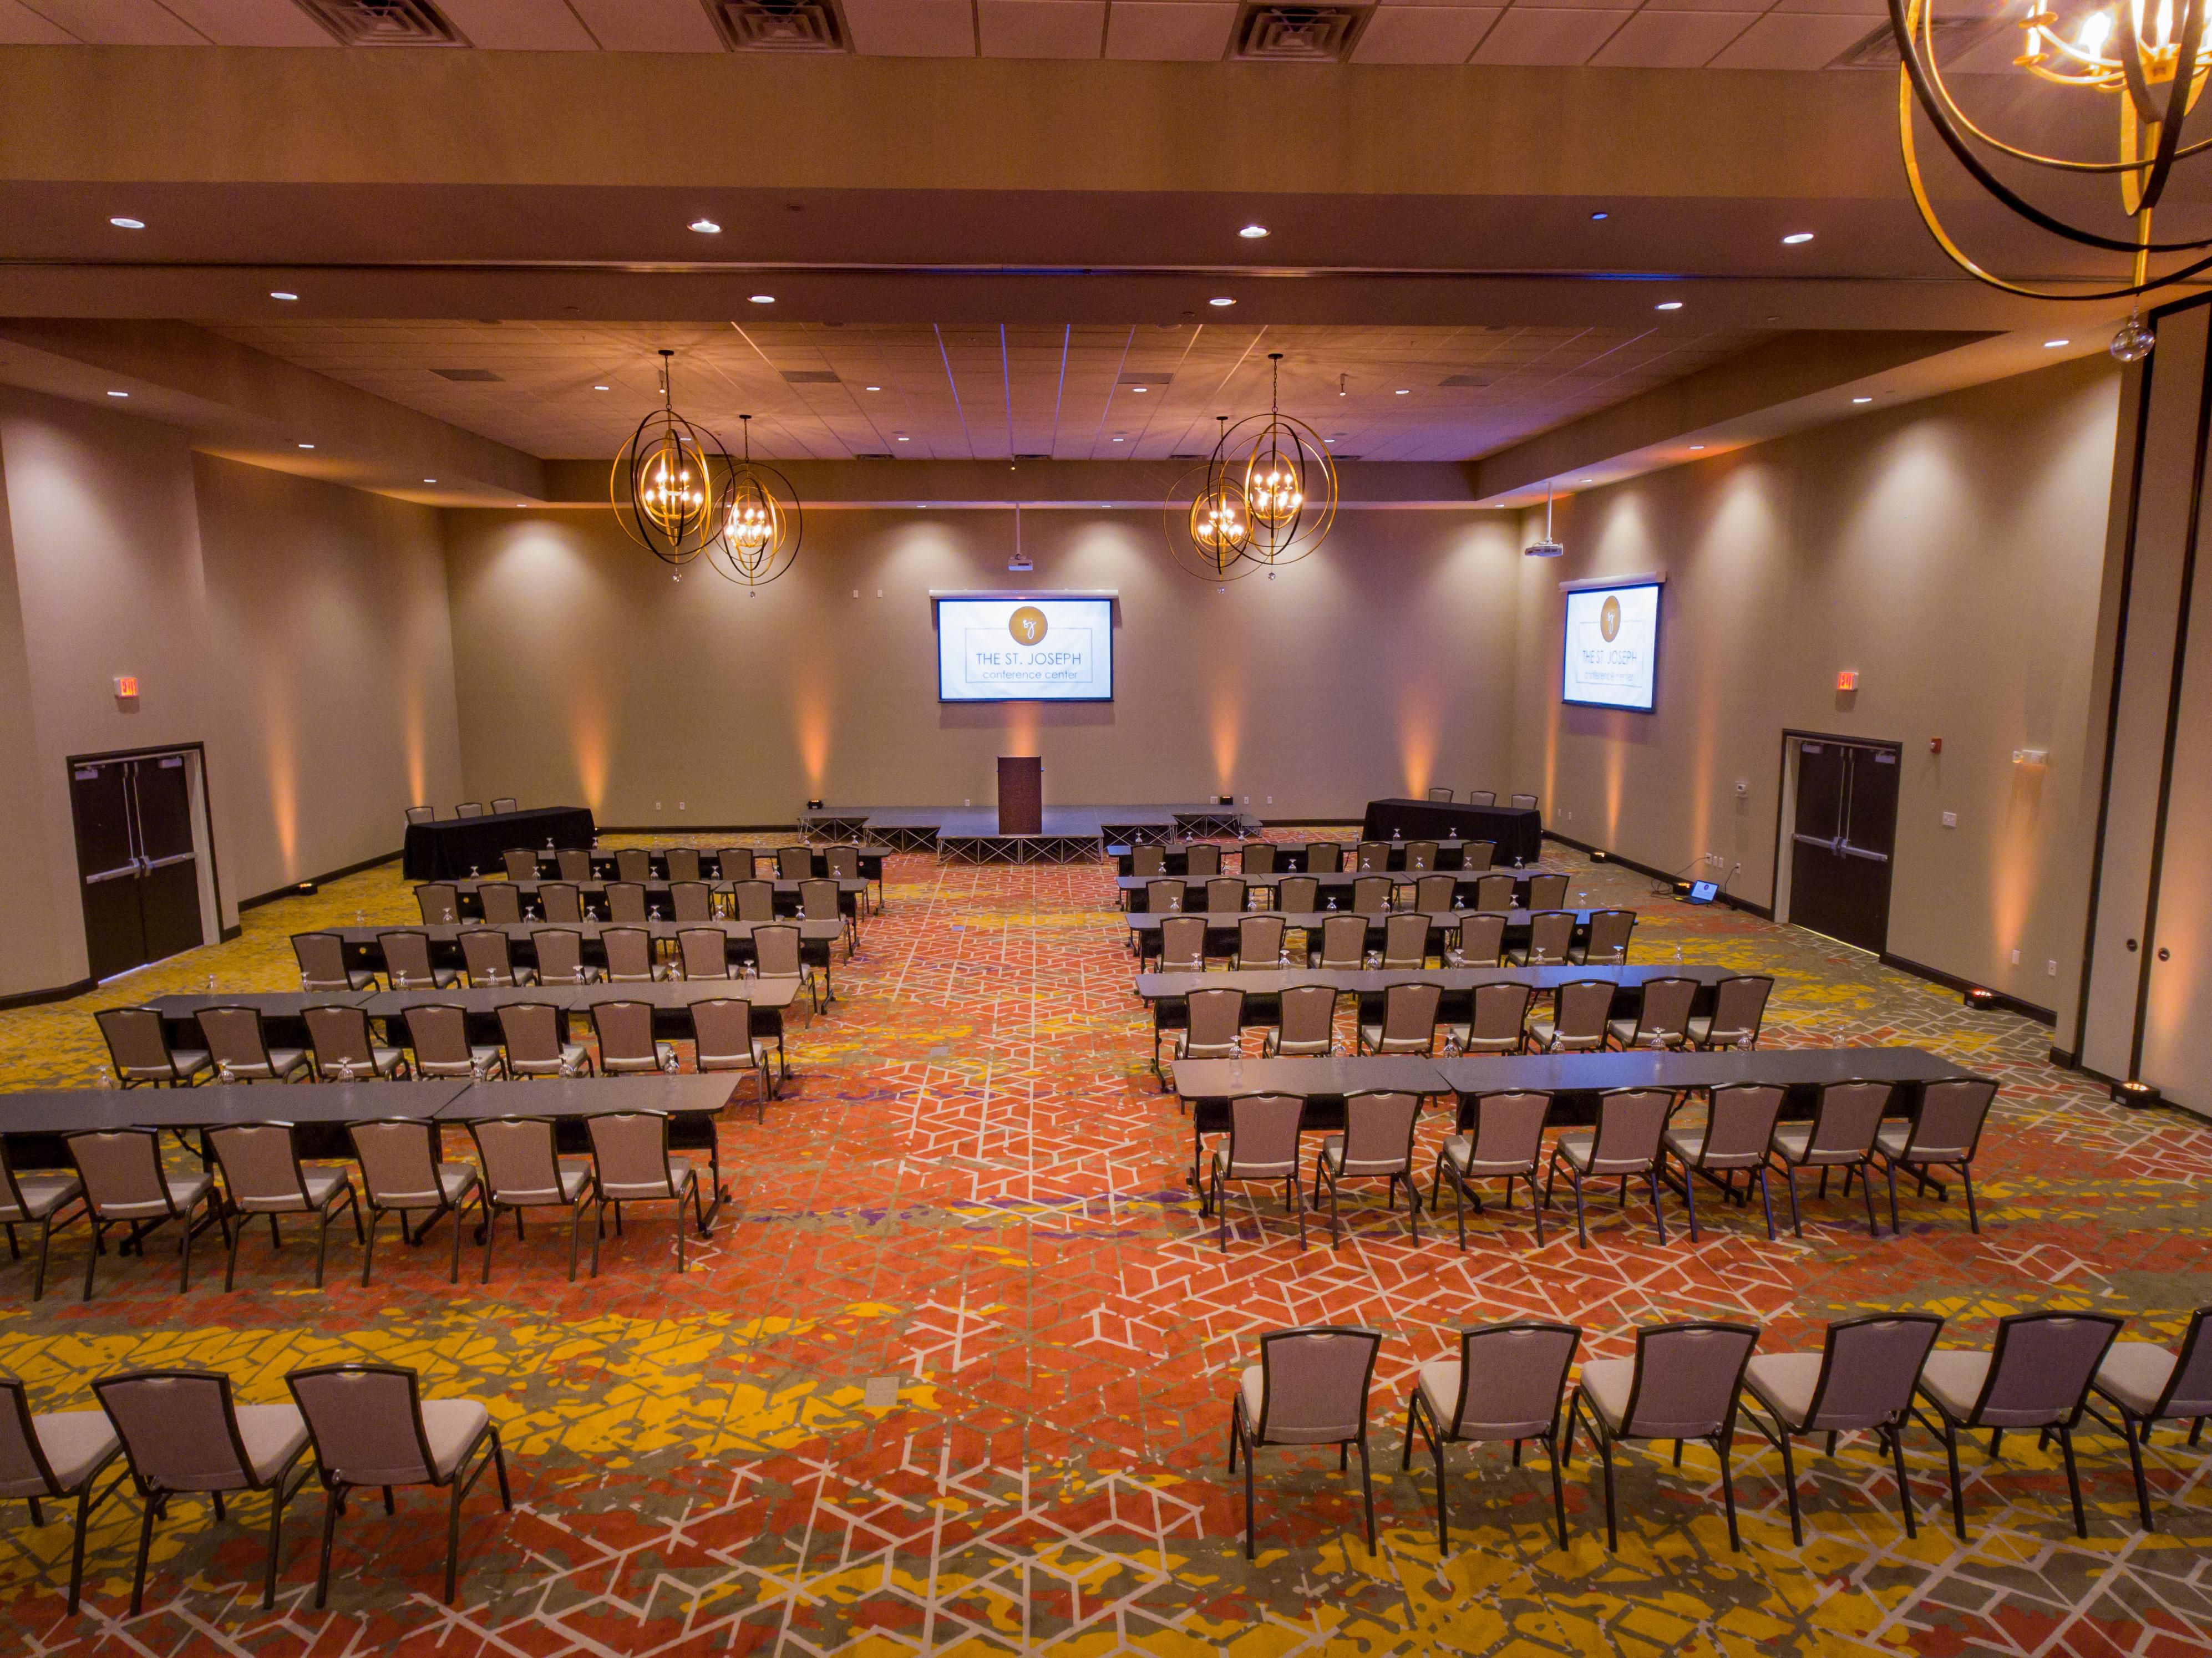 With over 10,000 square feet of space we are a perfect choice. We can accommodate Non-profit annual fundraisers, Sweet 16 and Quinceanera celebrations, and corporate meetings with our functional space. Wedding reception or ceremony? Yes, we do that- space for 400 plus people. Our sales team will coordinate every detail including onsite catering.